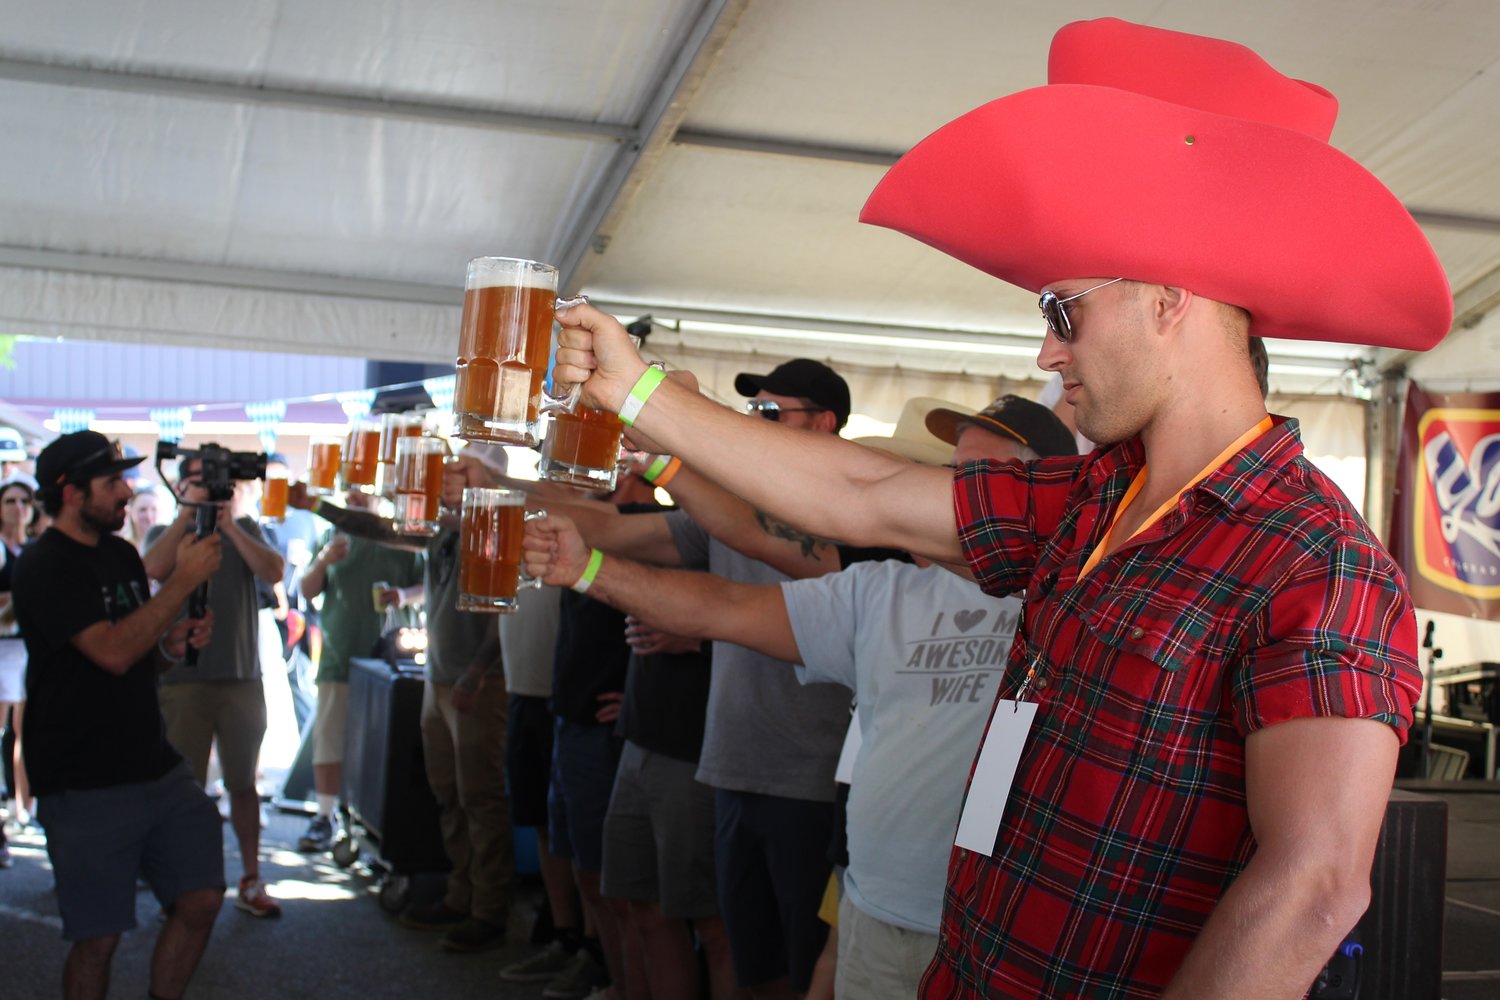 John Maslowsky, right, and others participate in the beer-stein-holding competition during the inaugural Wild West Oktoberfest Sept. 24 in downtown Golden. Maslowsky was volunteering at the event for YoColorado, the organizer.